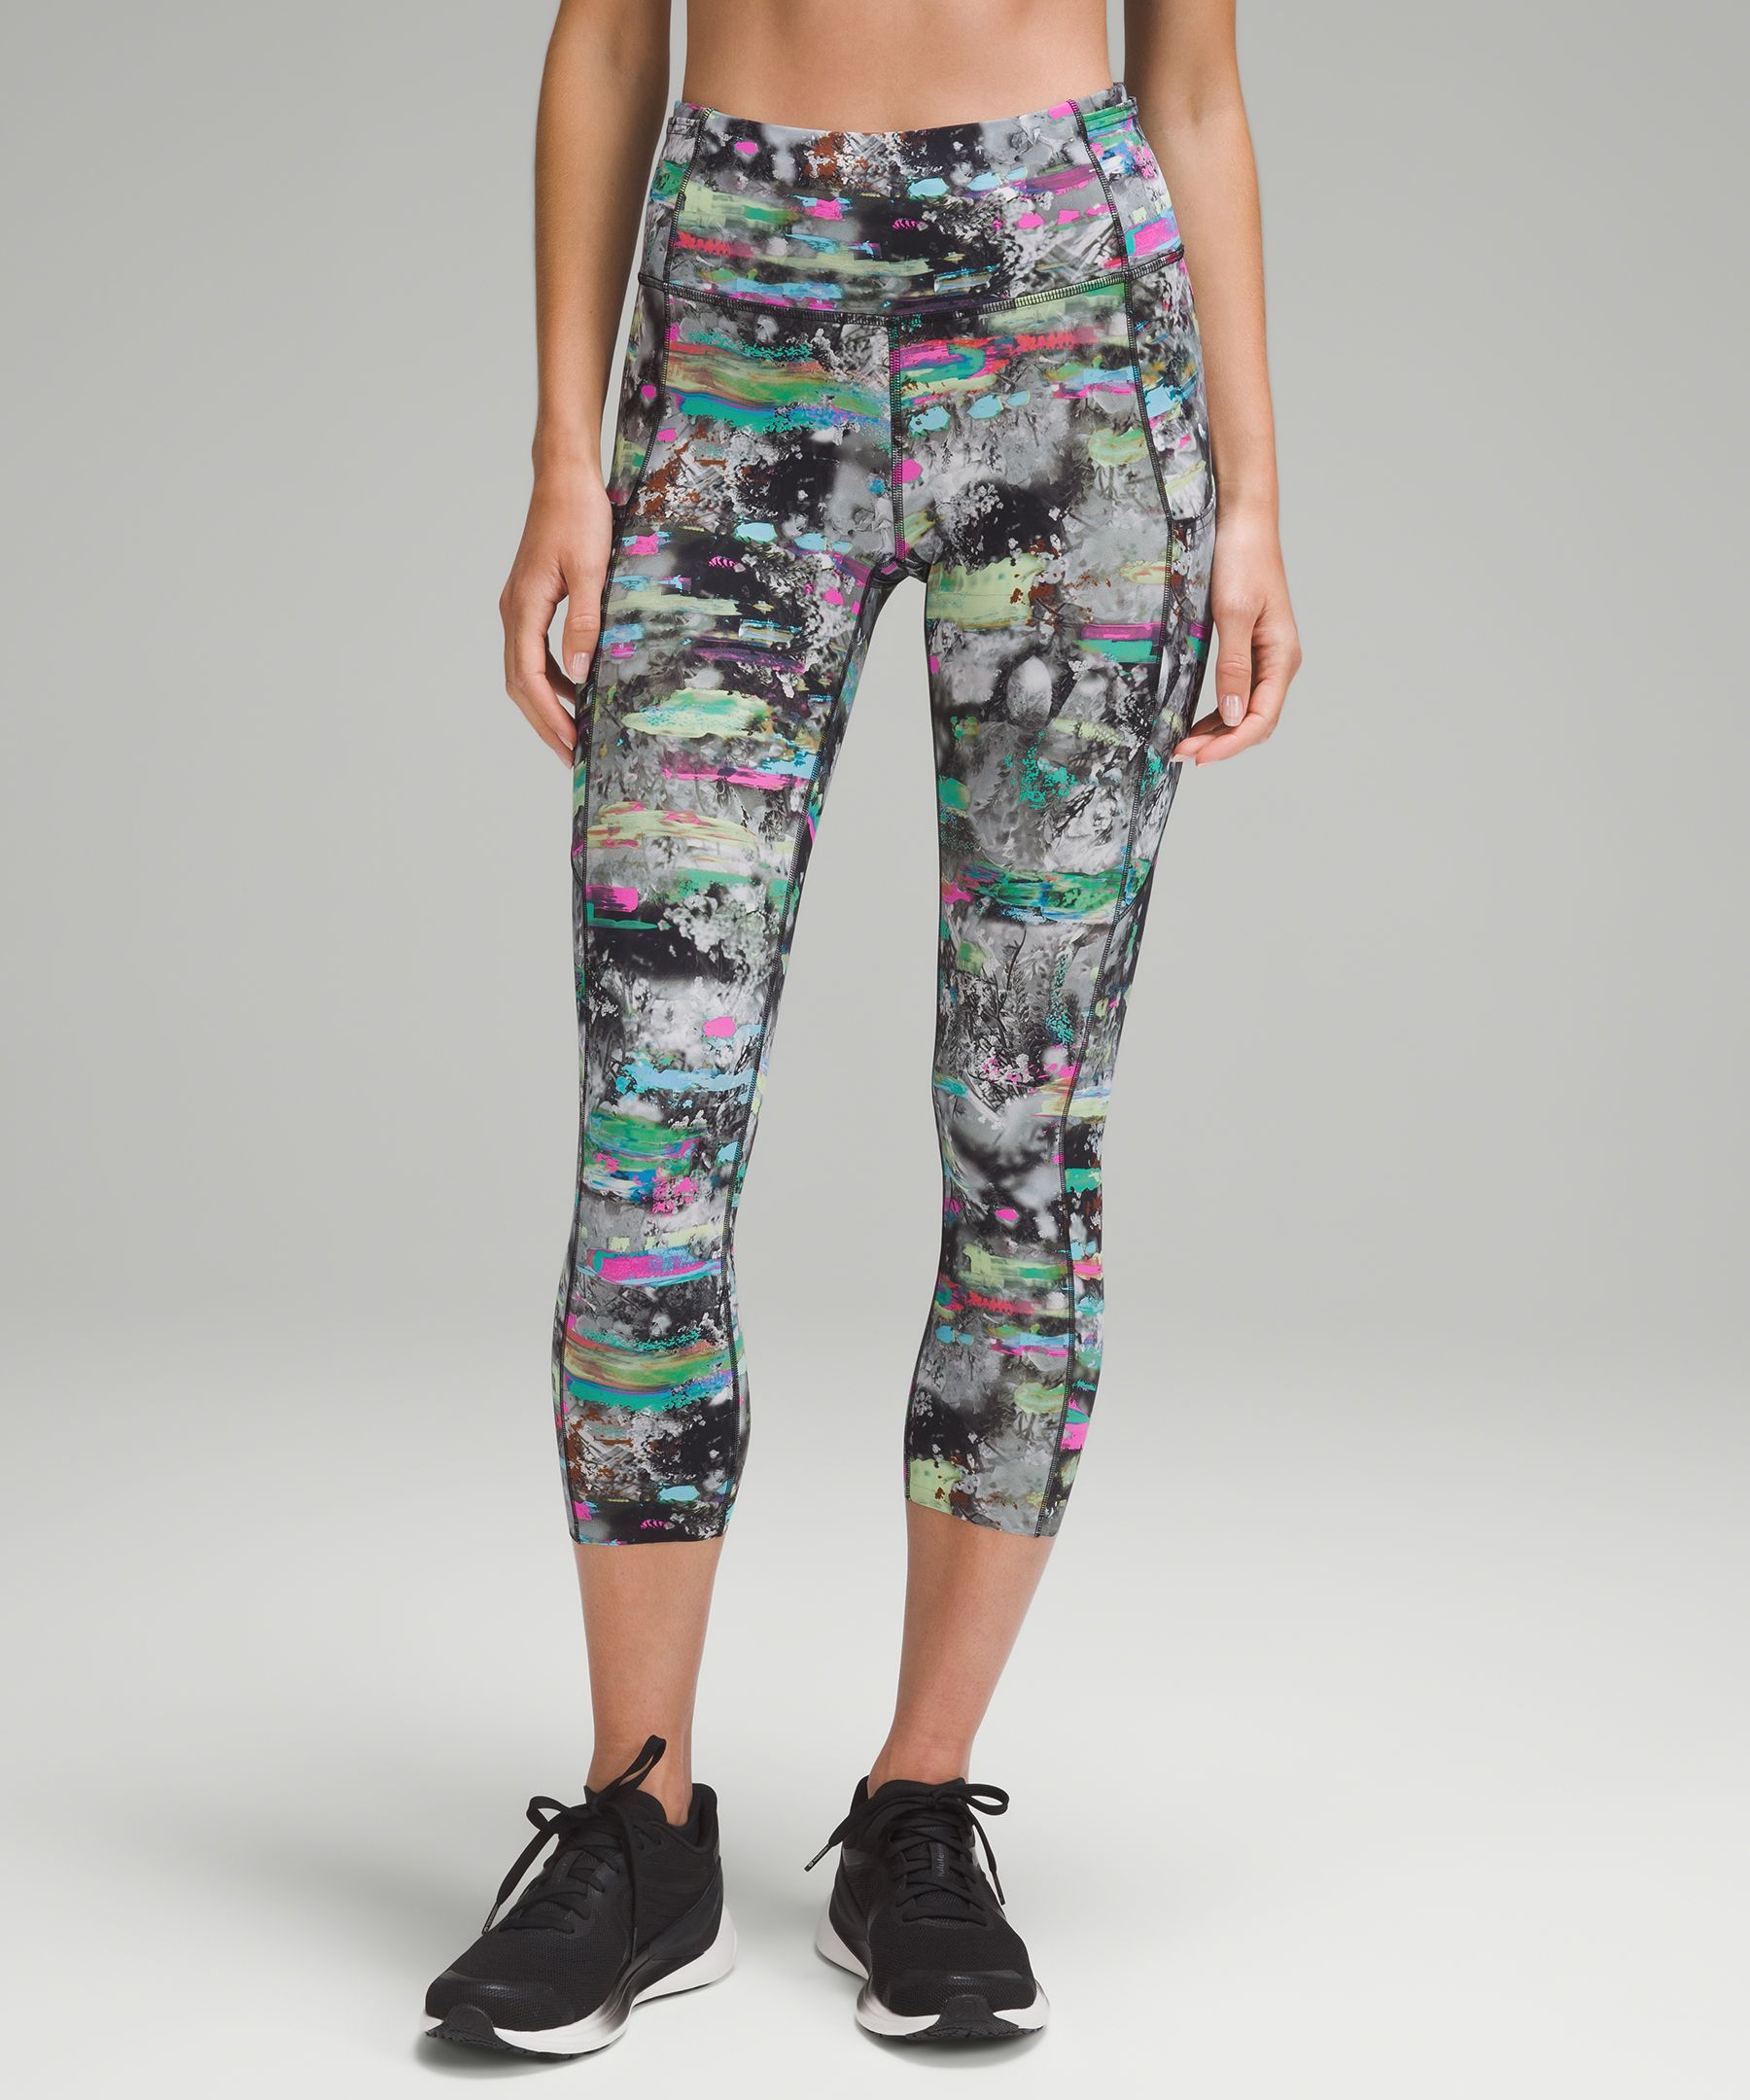 Lululemon Fast and Free High-Rise Crop 23